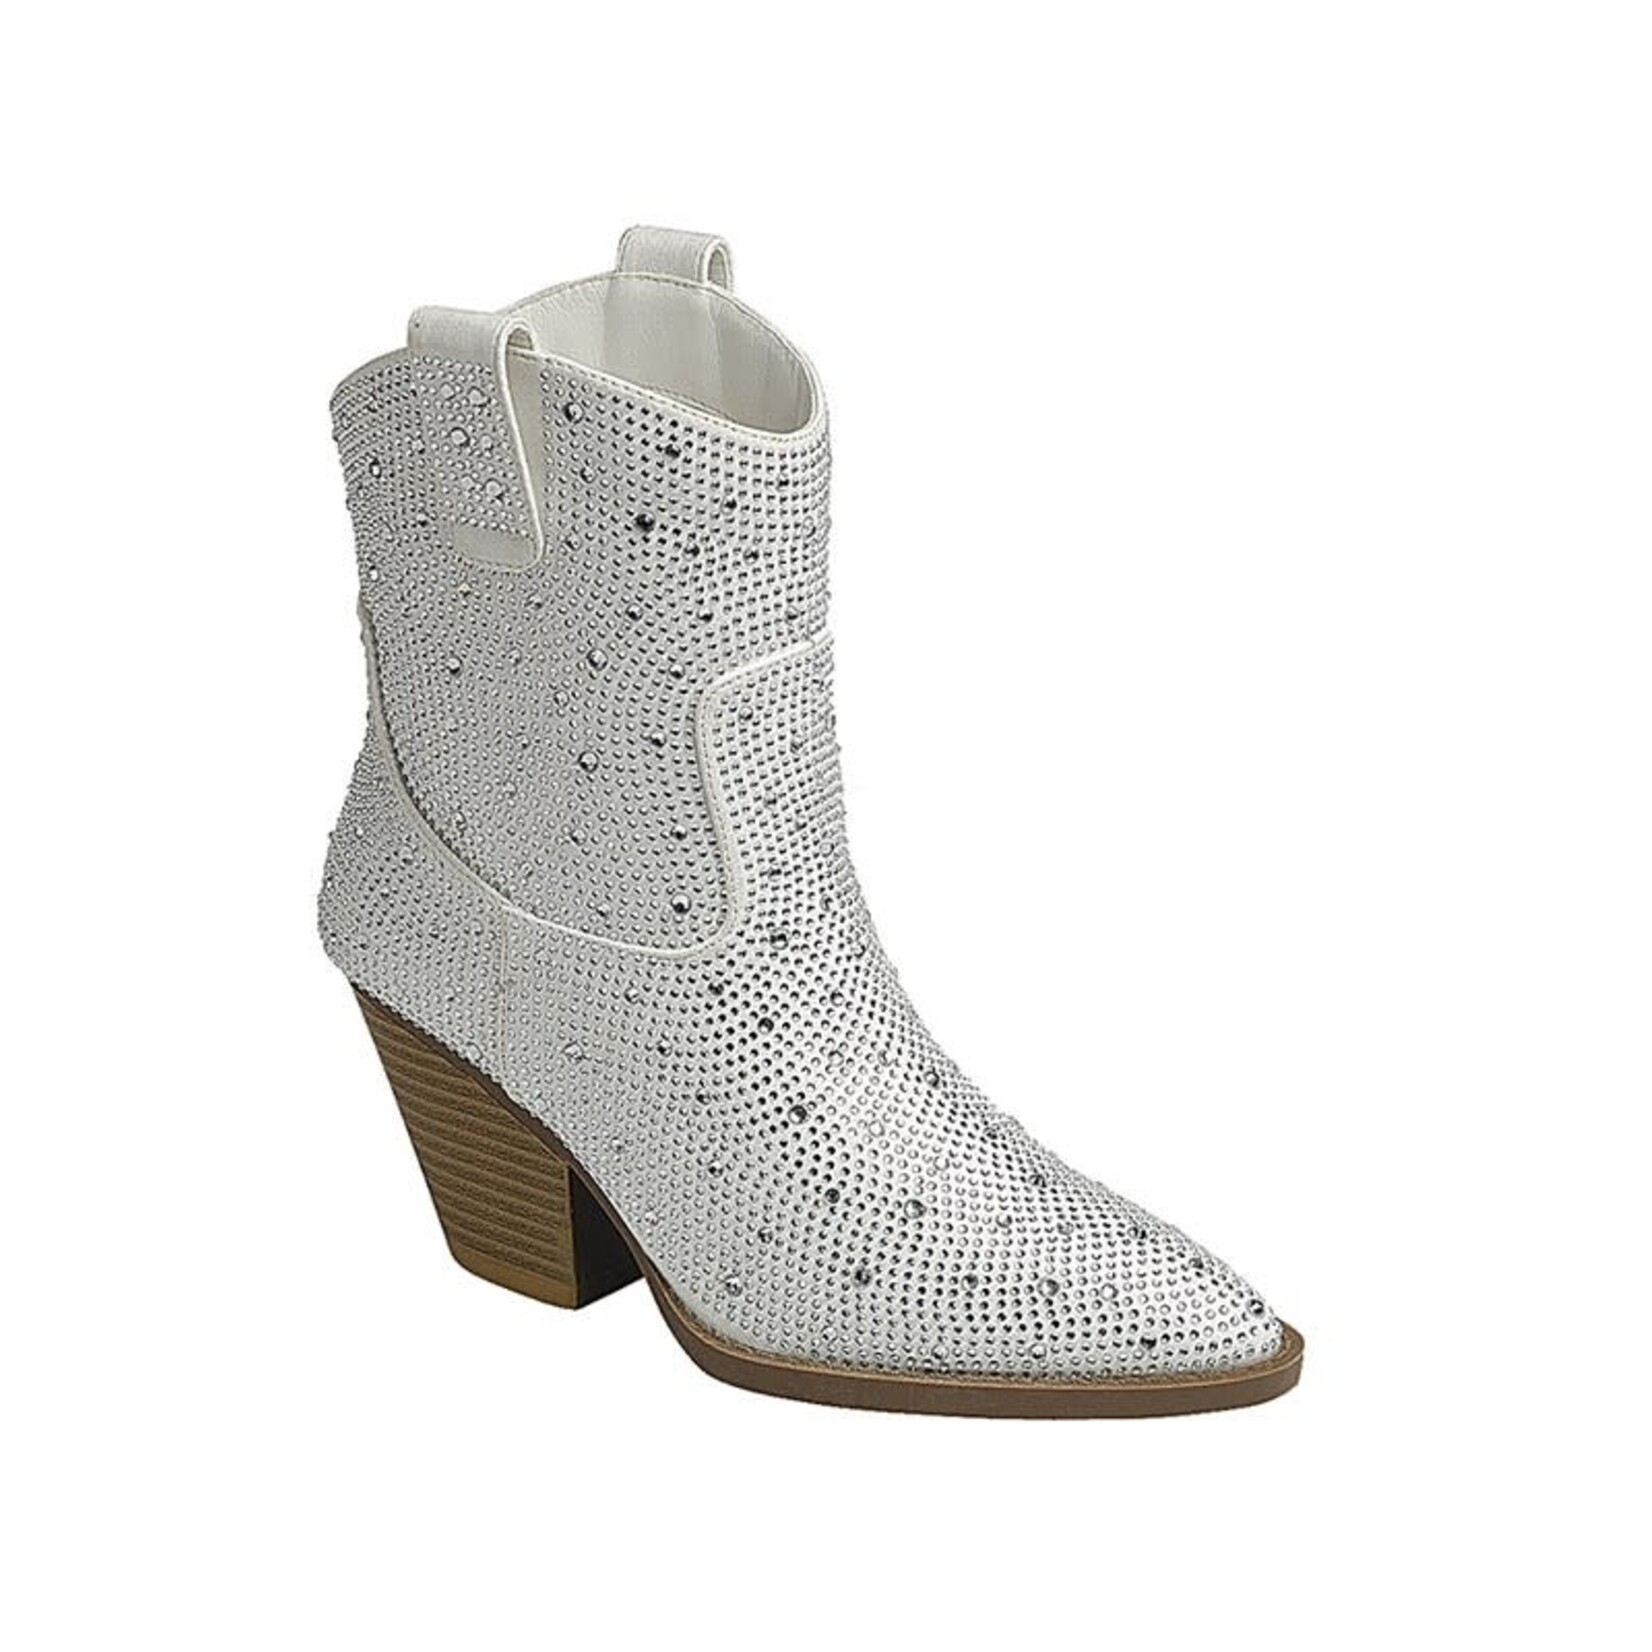 Let's See Style Rhinestone Western Boots